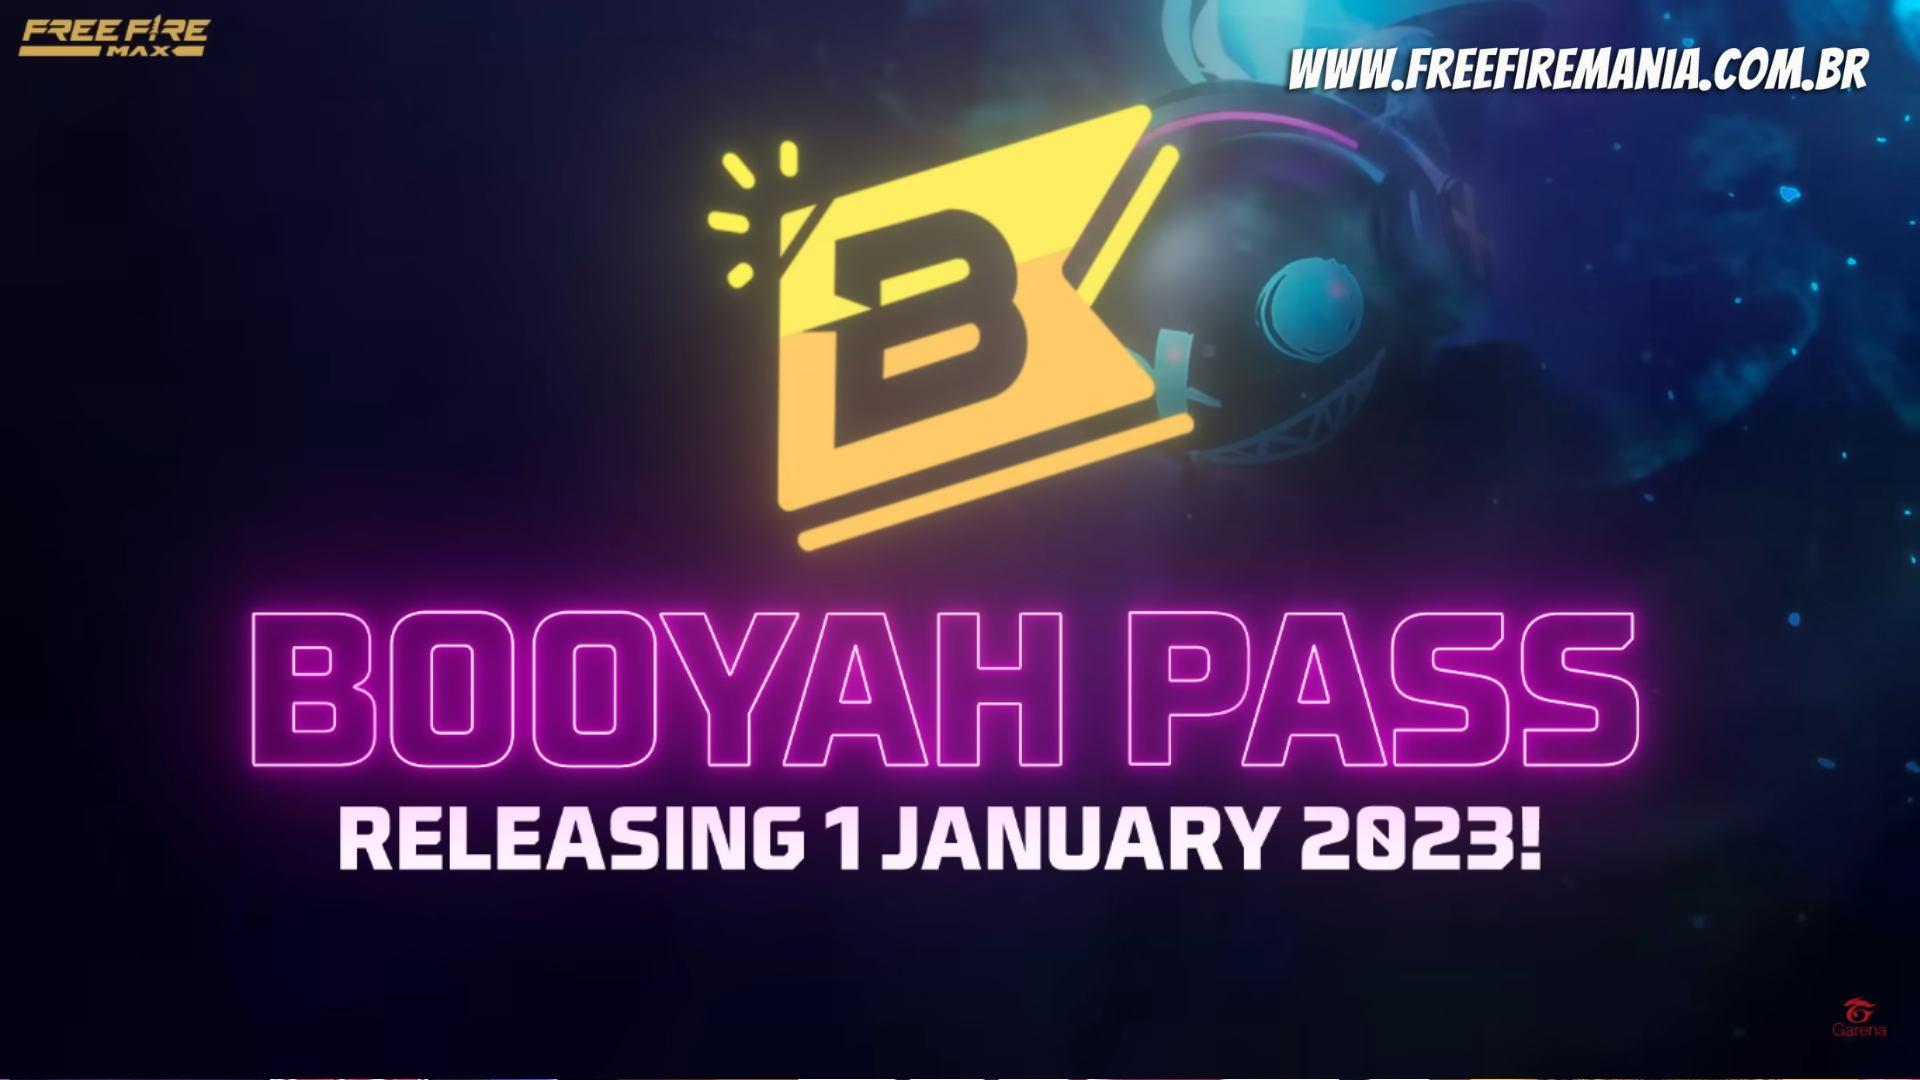 Free Fire: Garena announces new “Booyah Pass”, replacement for the Elite Pass